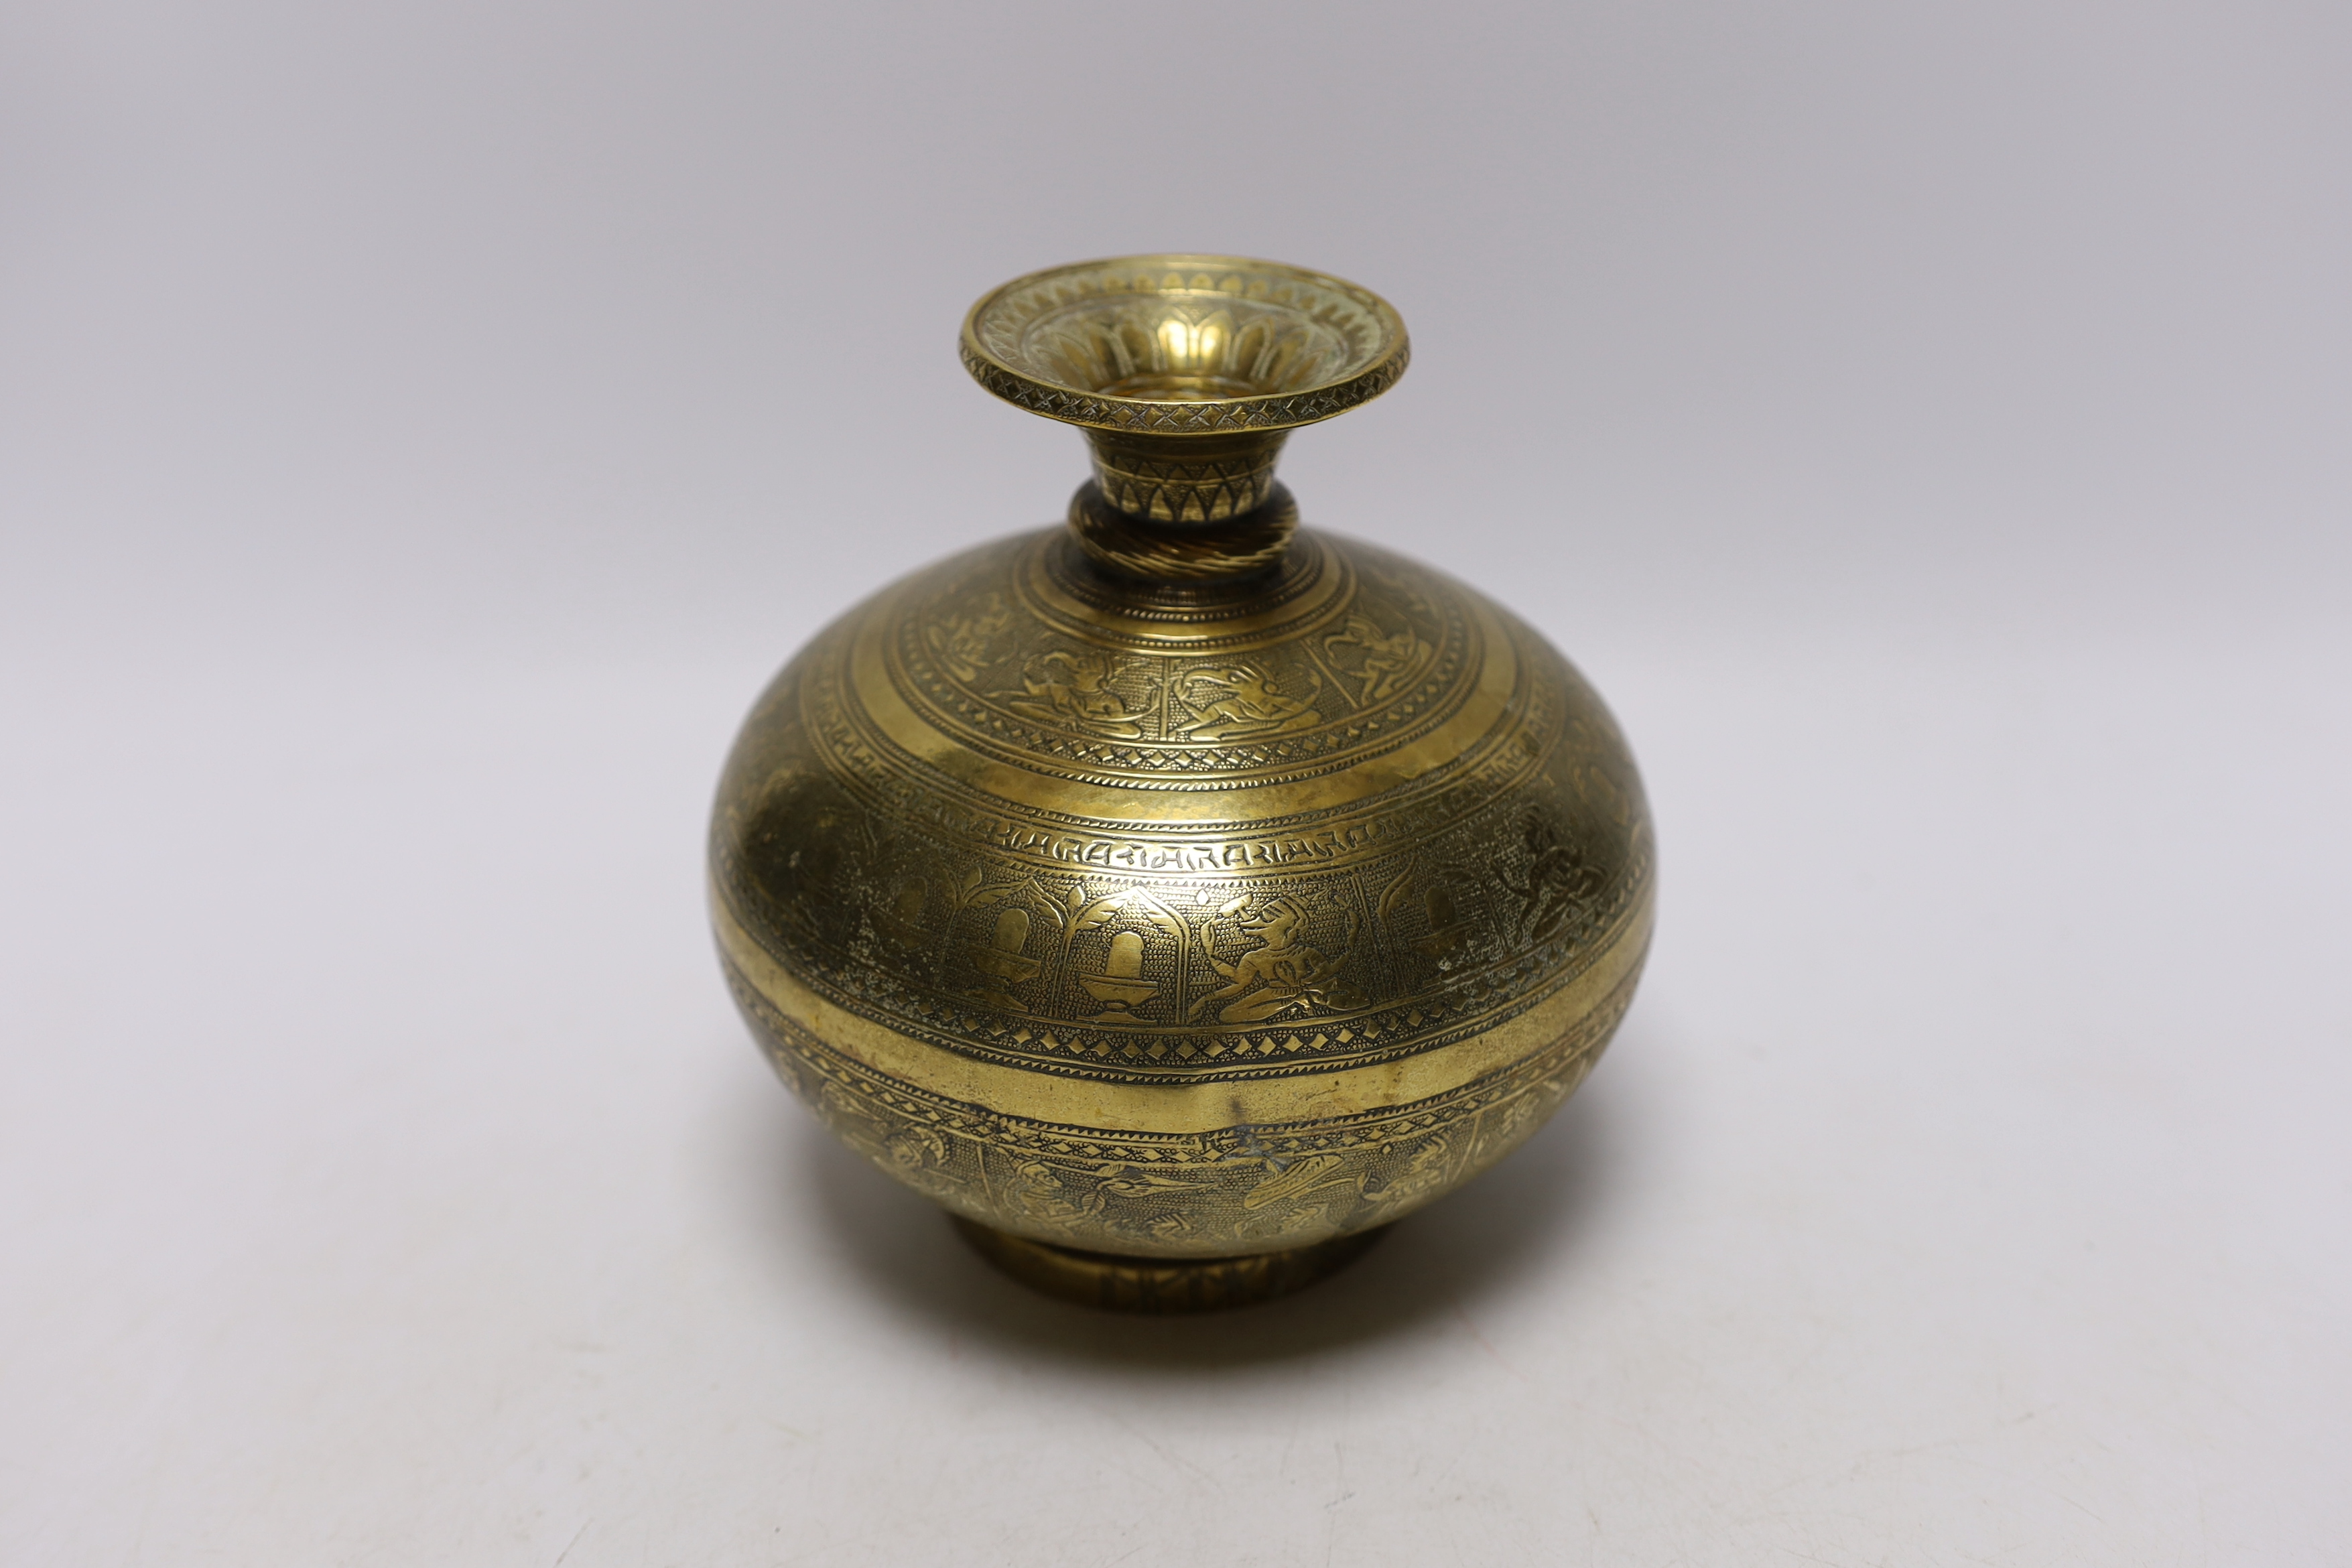 Eastern brassware to include a betel box on wheels, a vase with engraved detail and a pierced box, tallest 15.5cm (3)